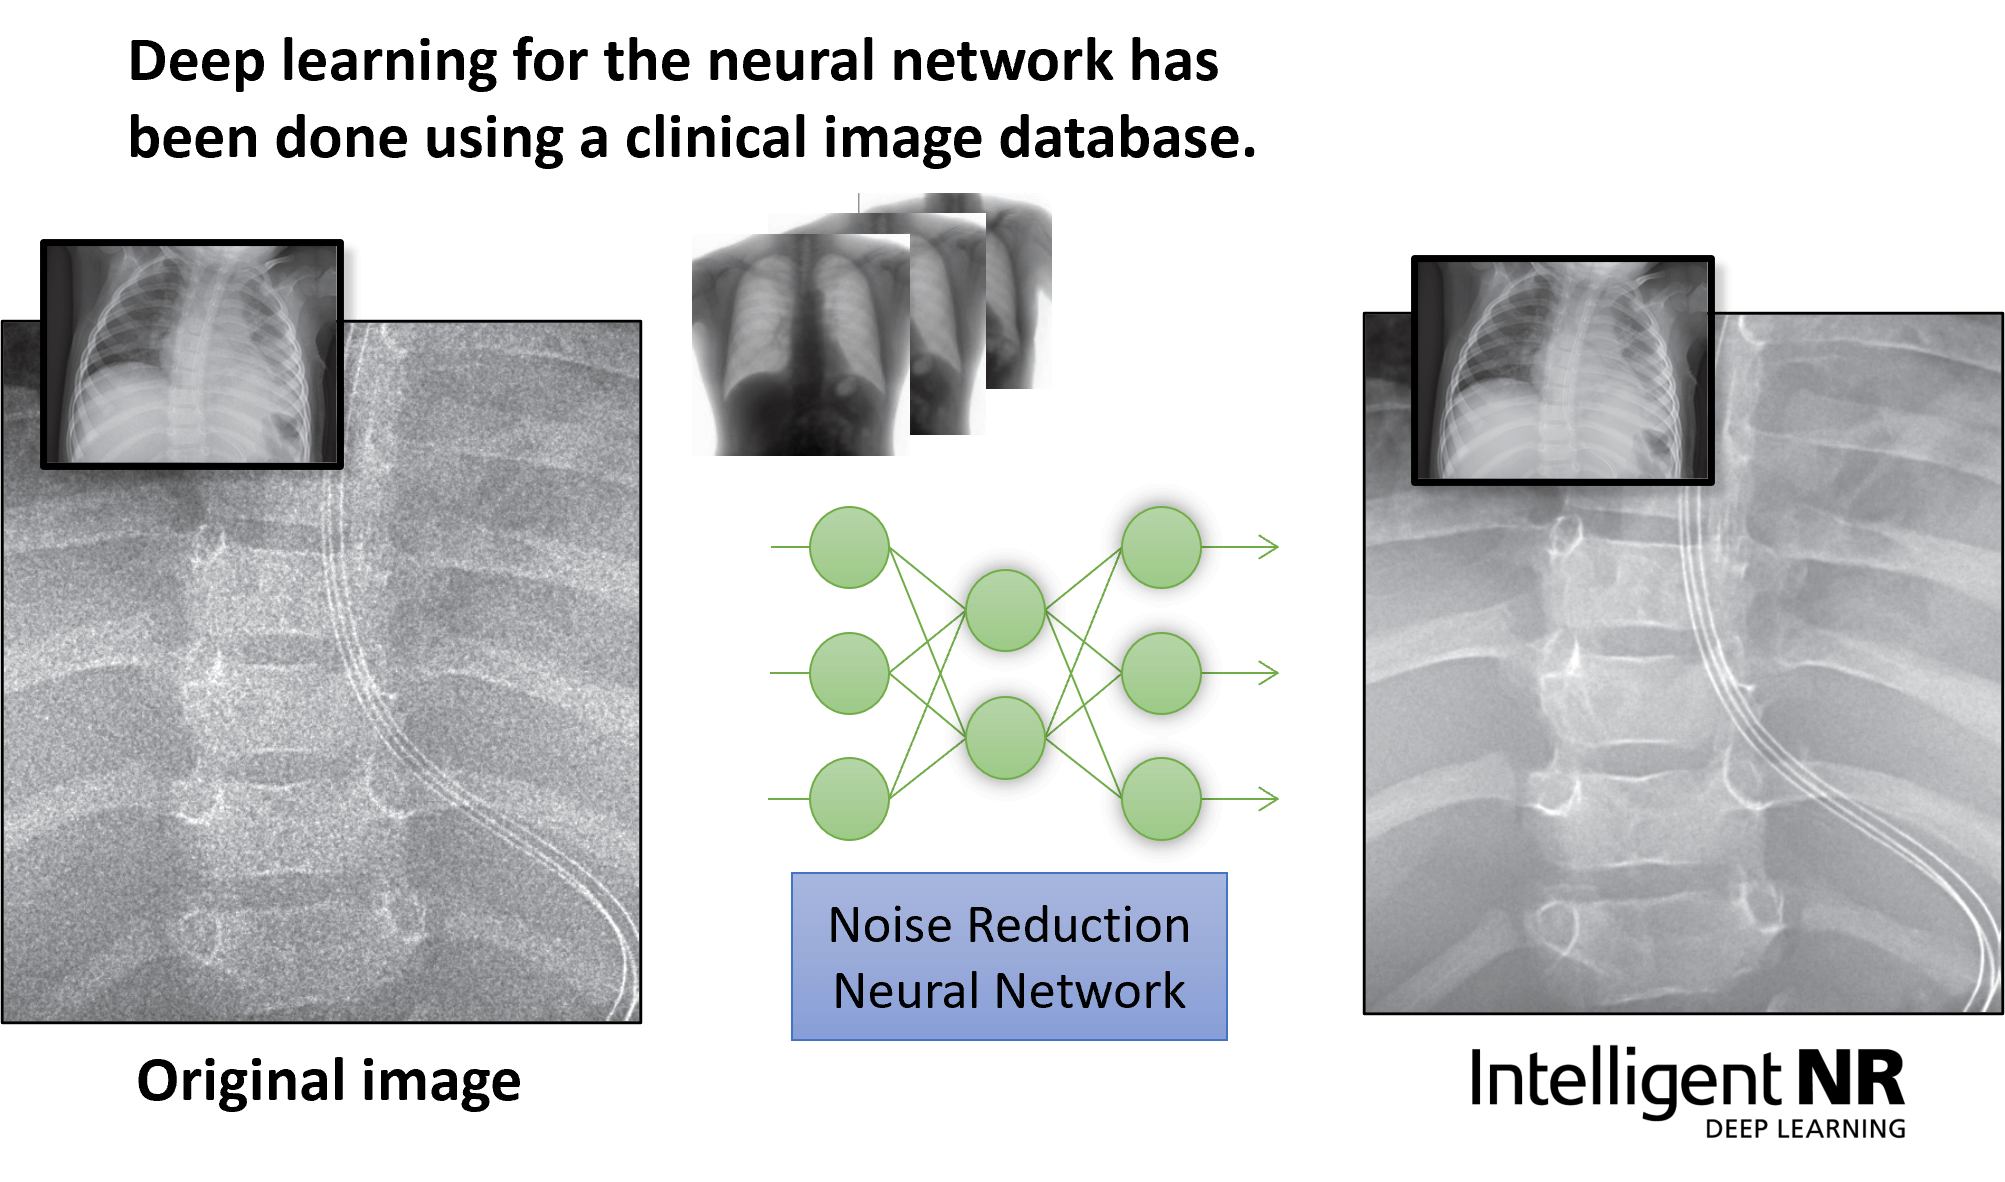 Intelligent NR can reduces noise using deep lerning technology which has trained by clinical image database.